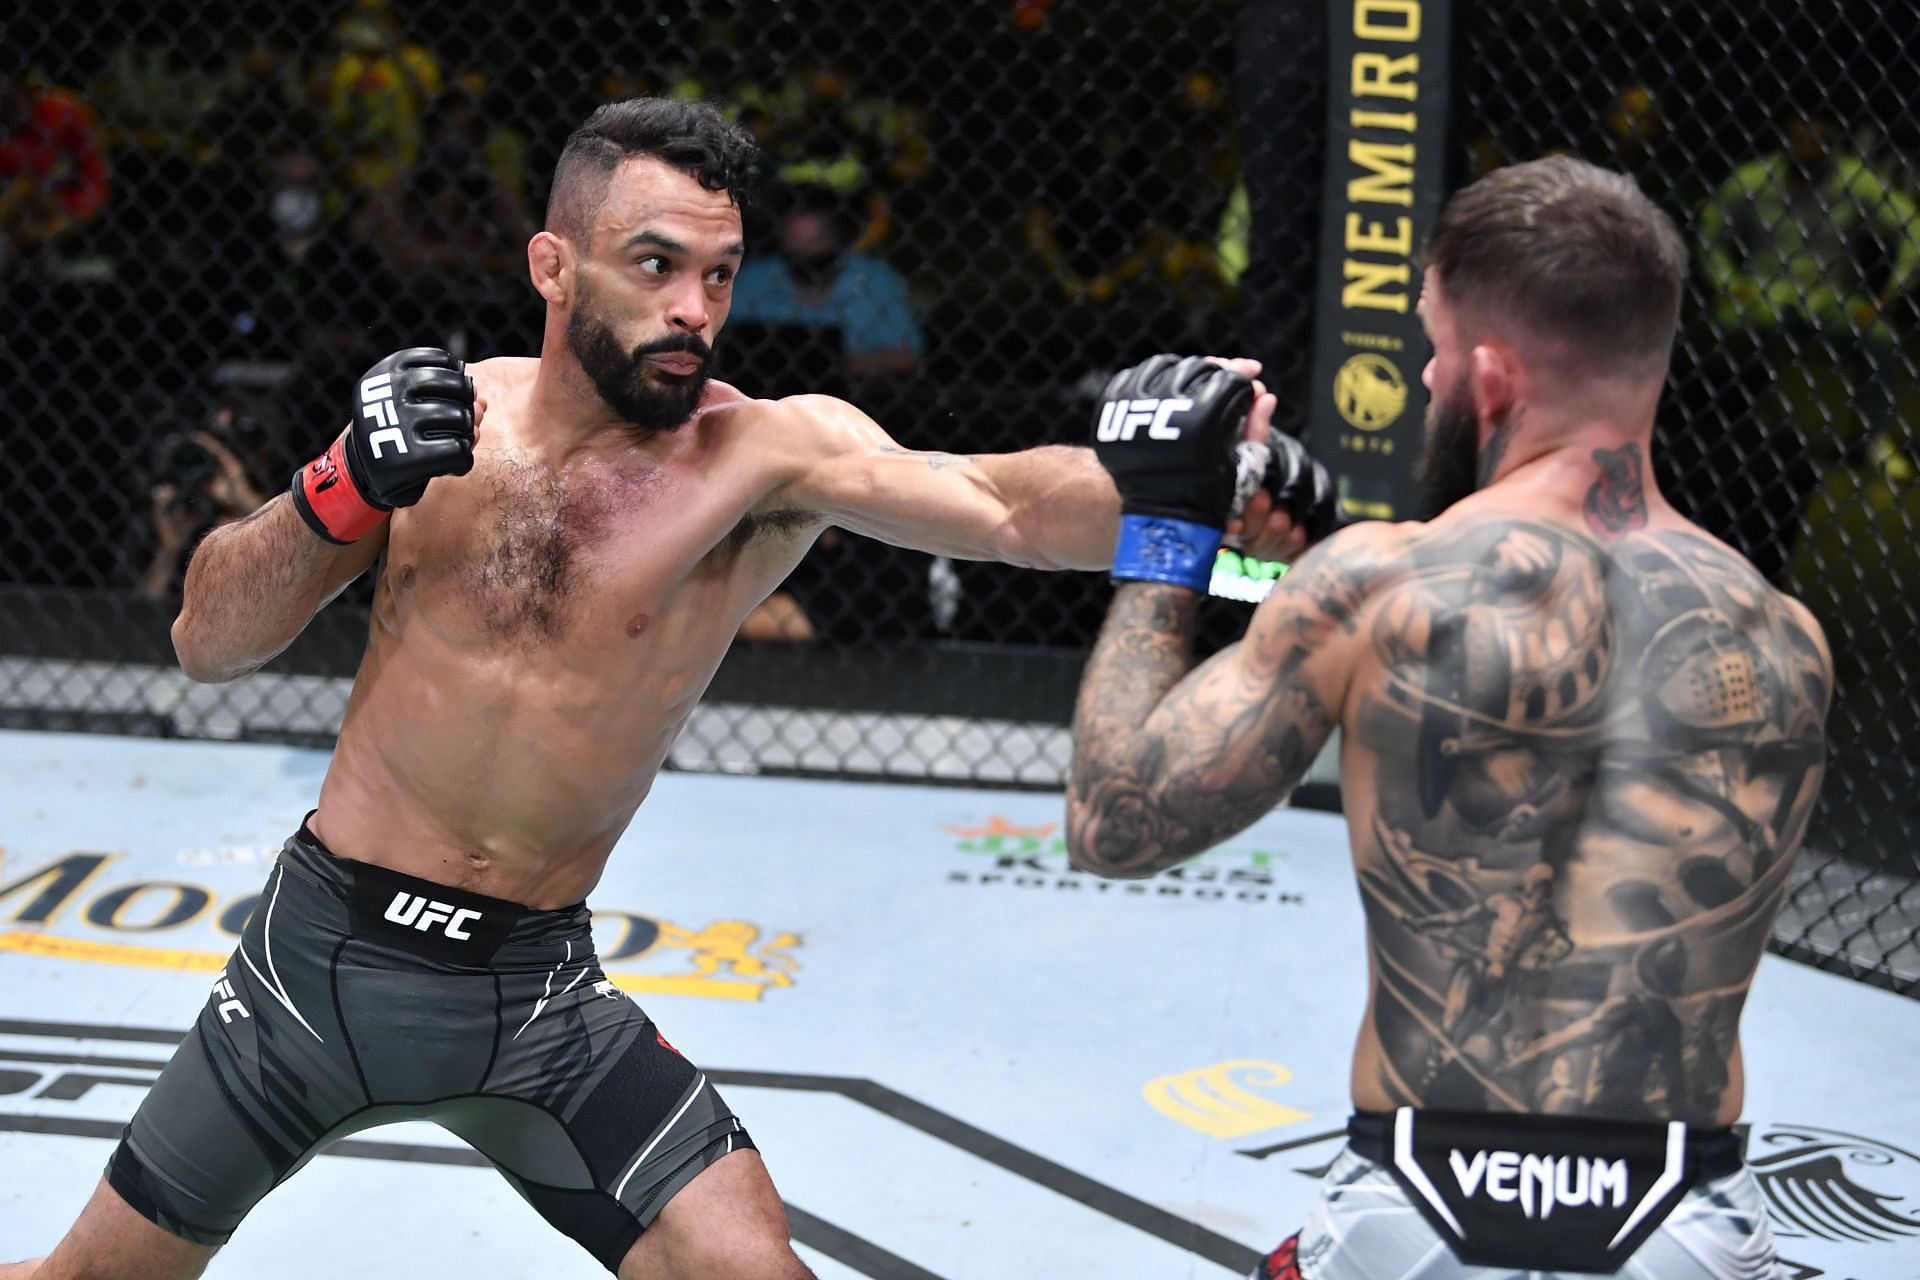 UFC fans are unlikely to see Rob Font talking trash on social media any time soon